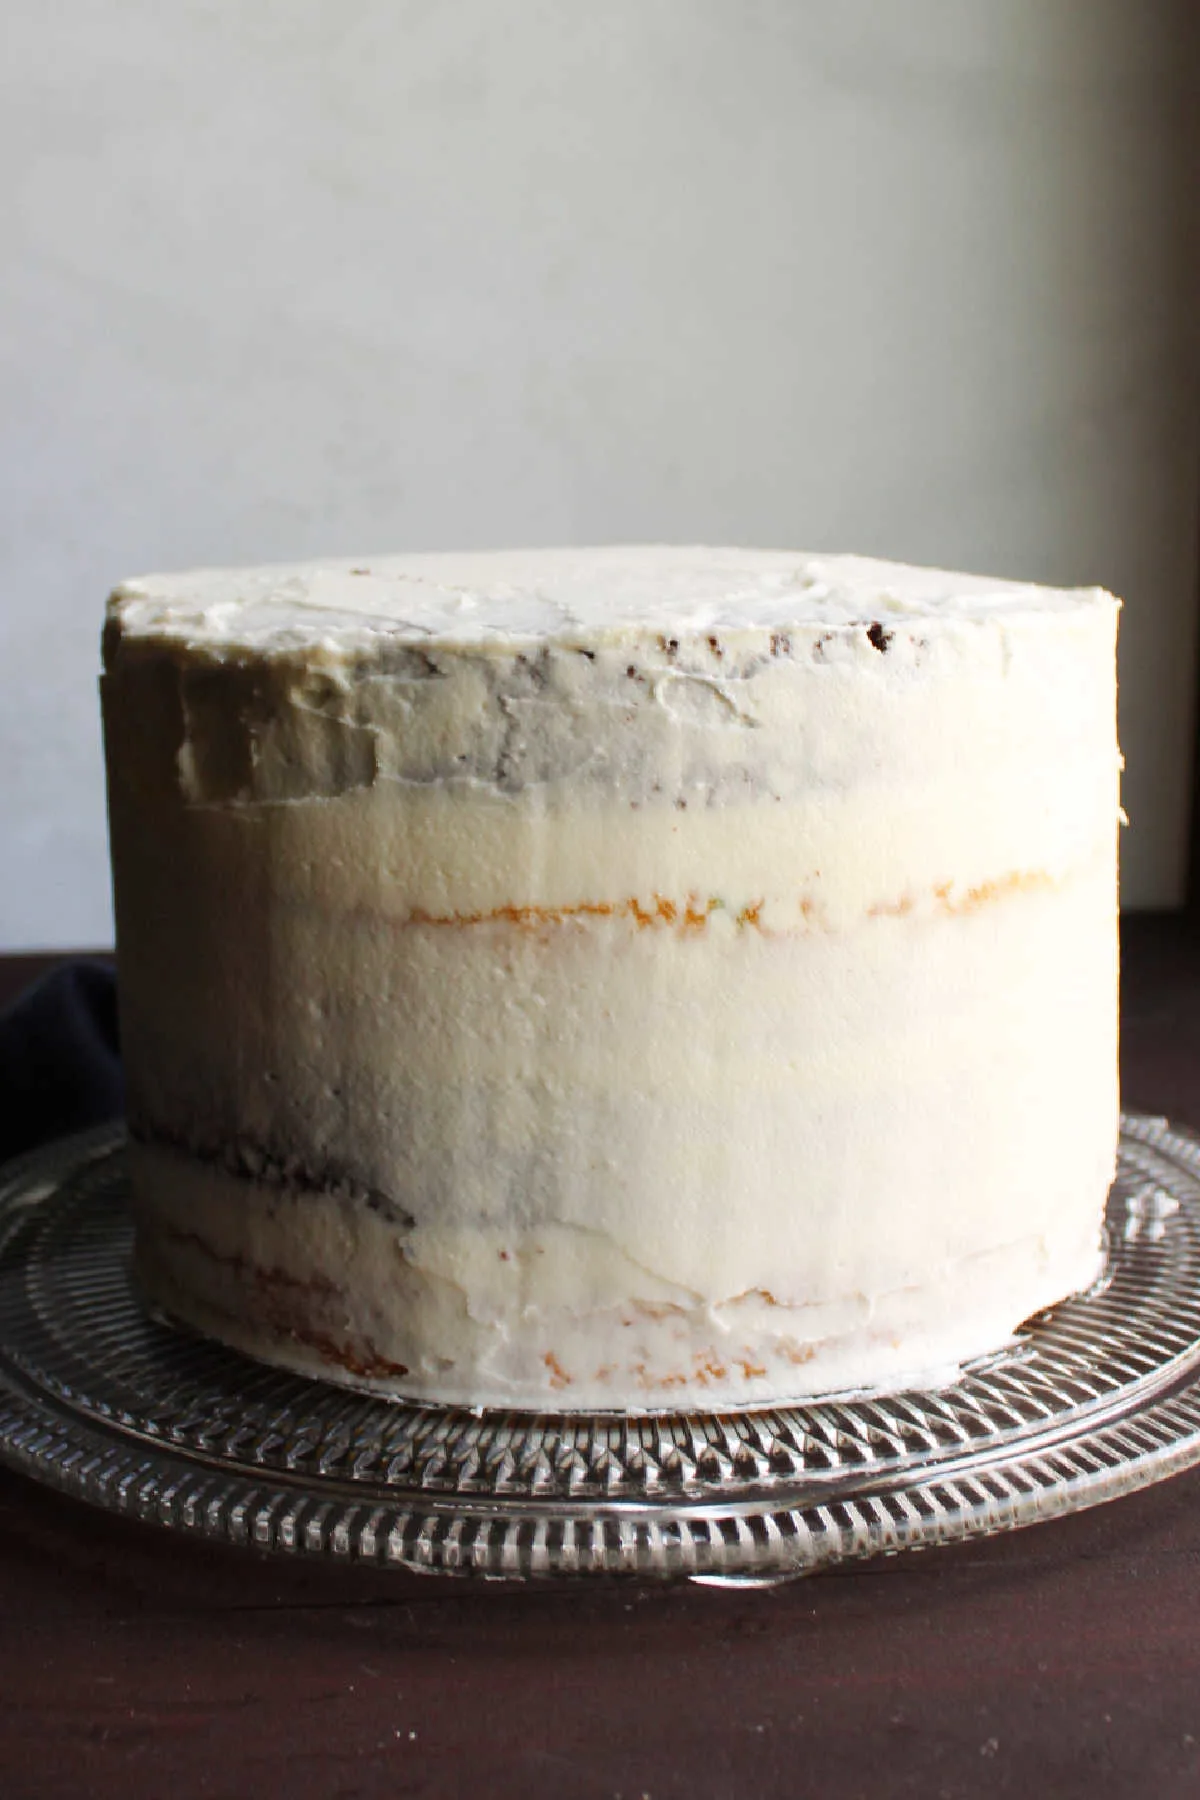 Layer cake with crumb coat of marshmallow buttercream.